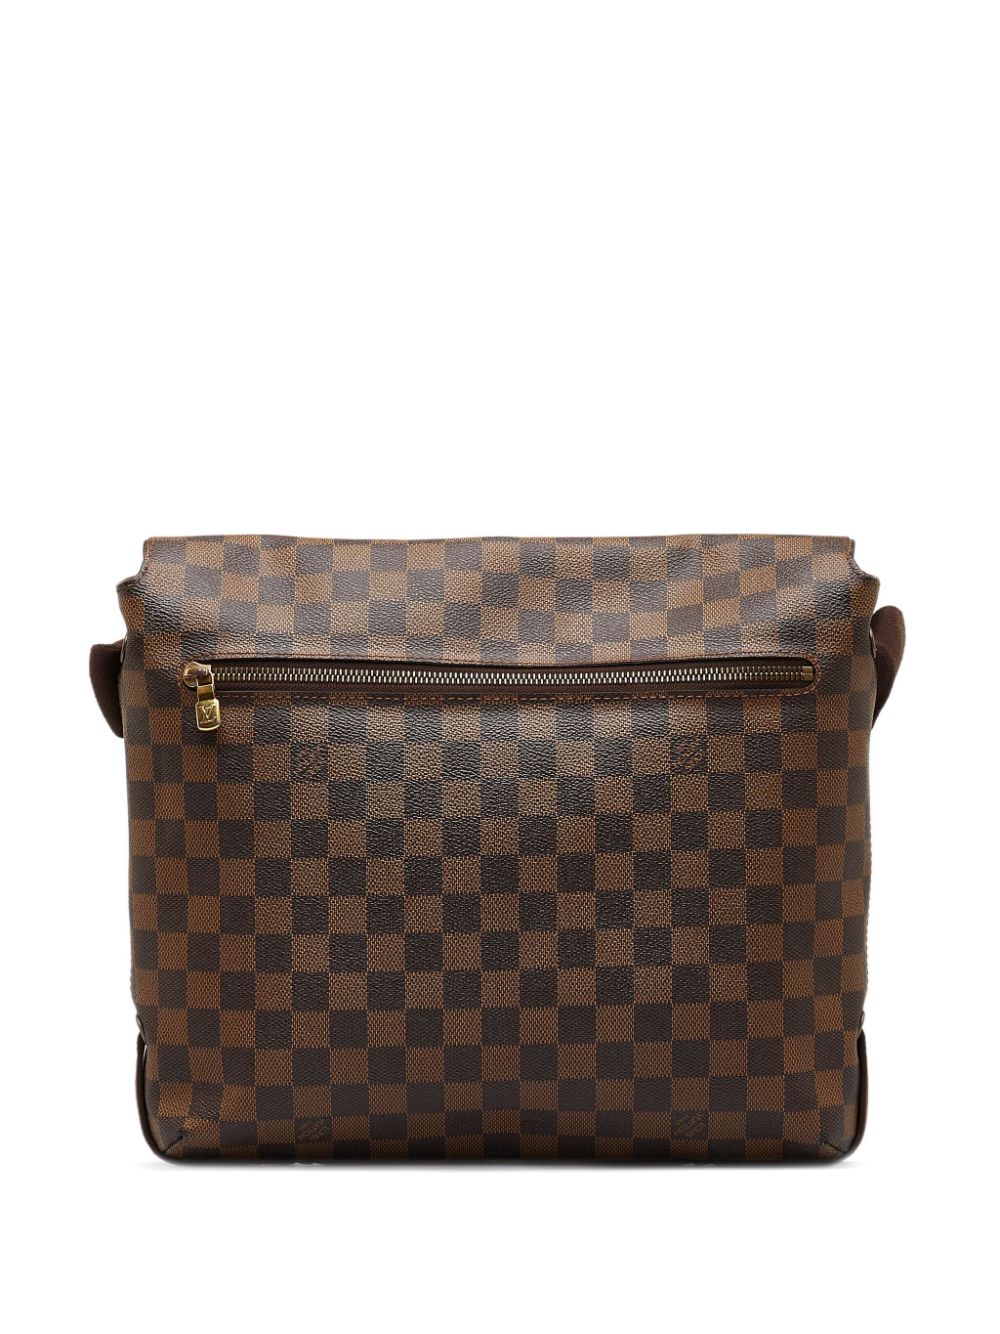 Louis Vuitton Pre-Owned 2008 pre-owned Brooklyn MM crossbody bag - Bruin